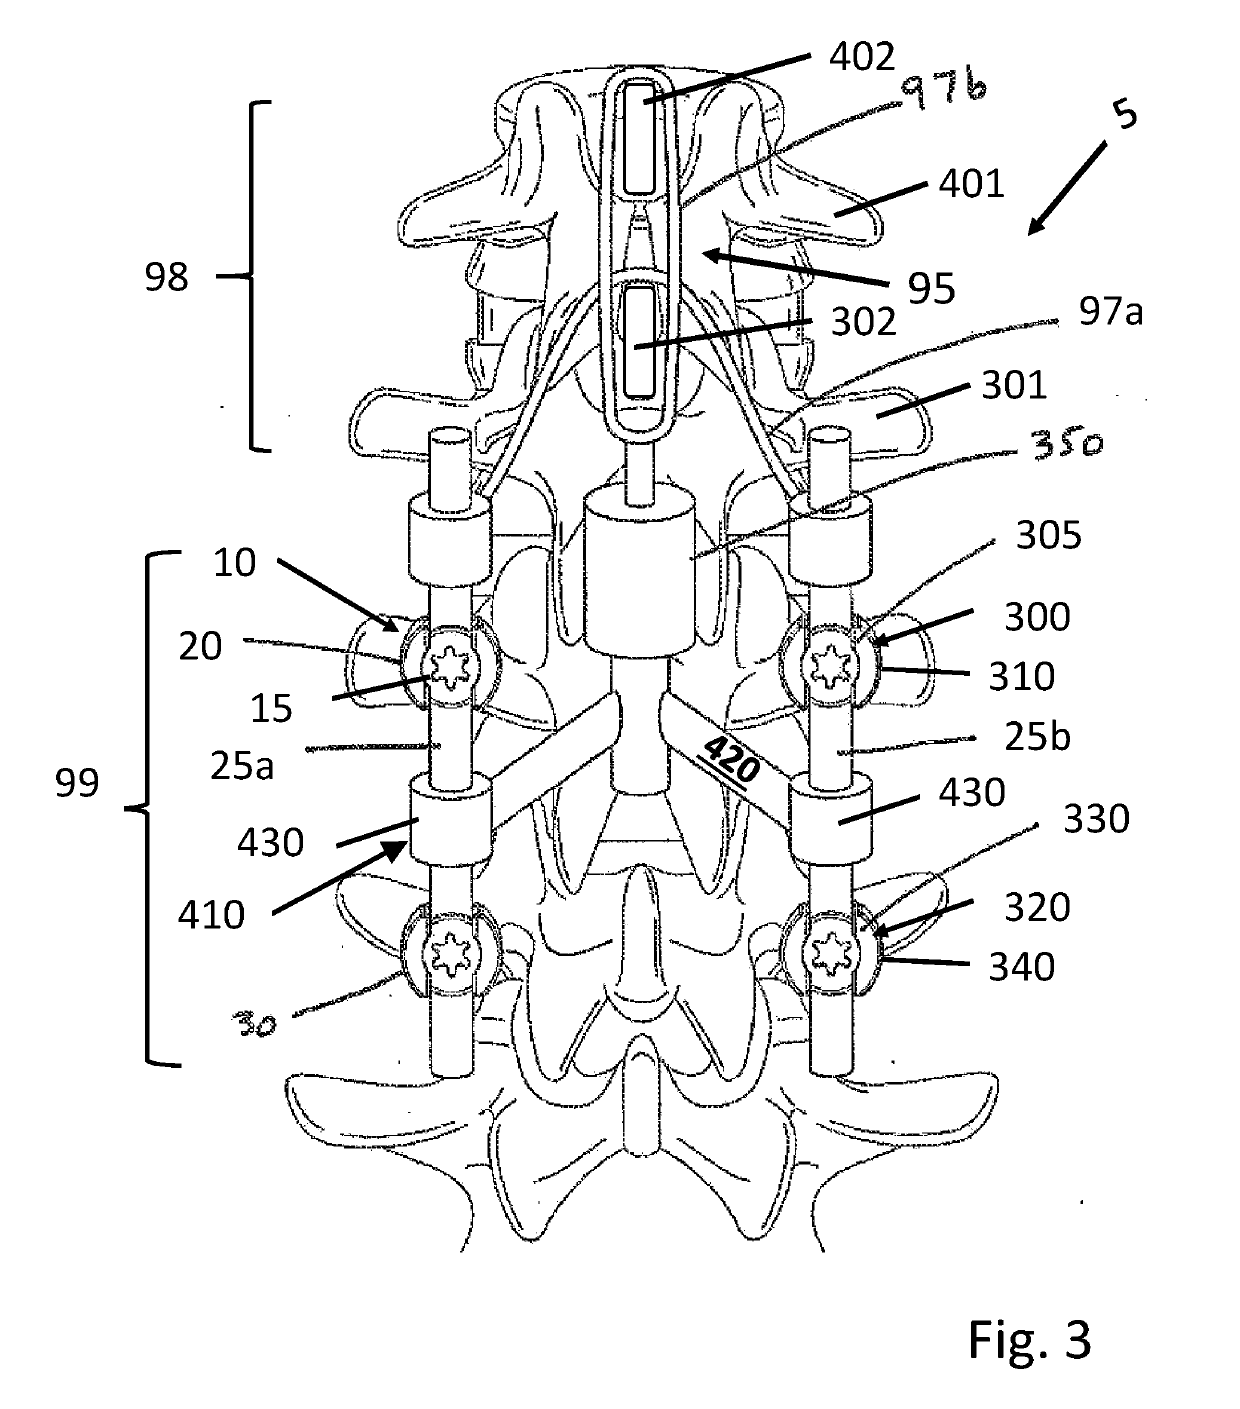 Post-Operatively Adjustable Spinal Fixation Devices